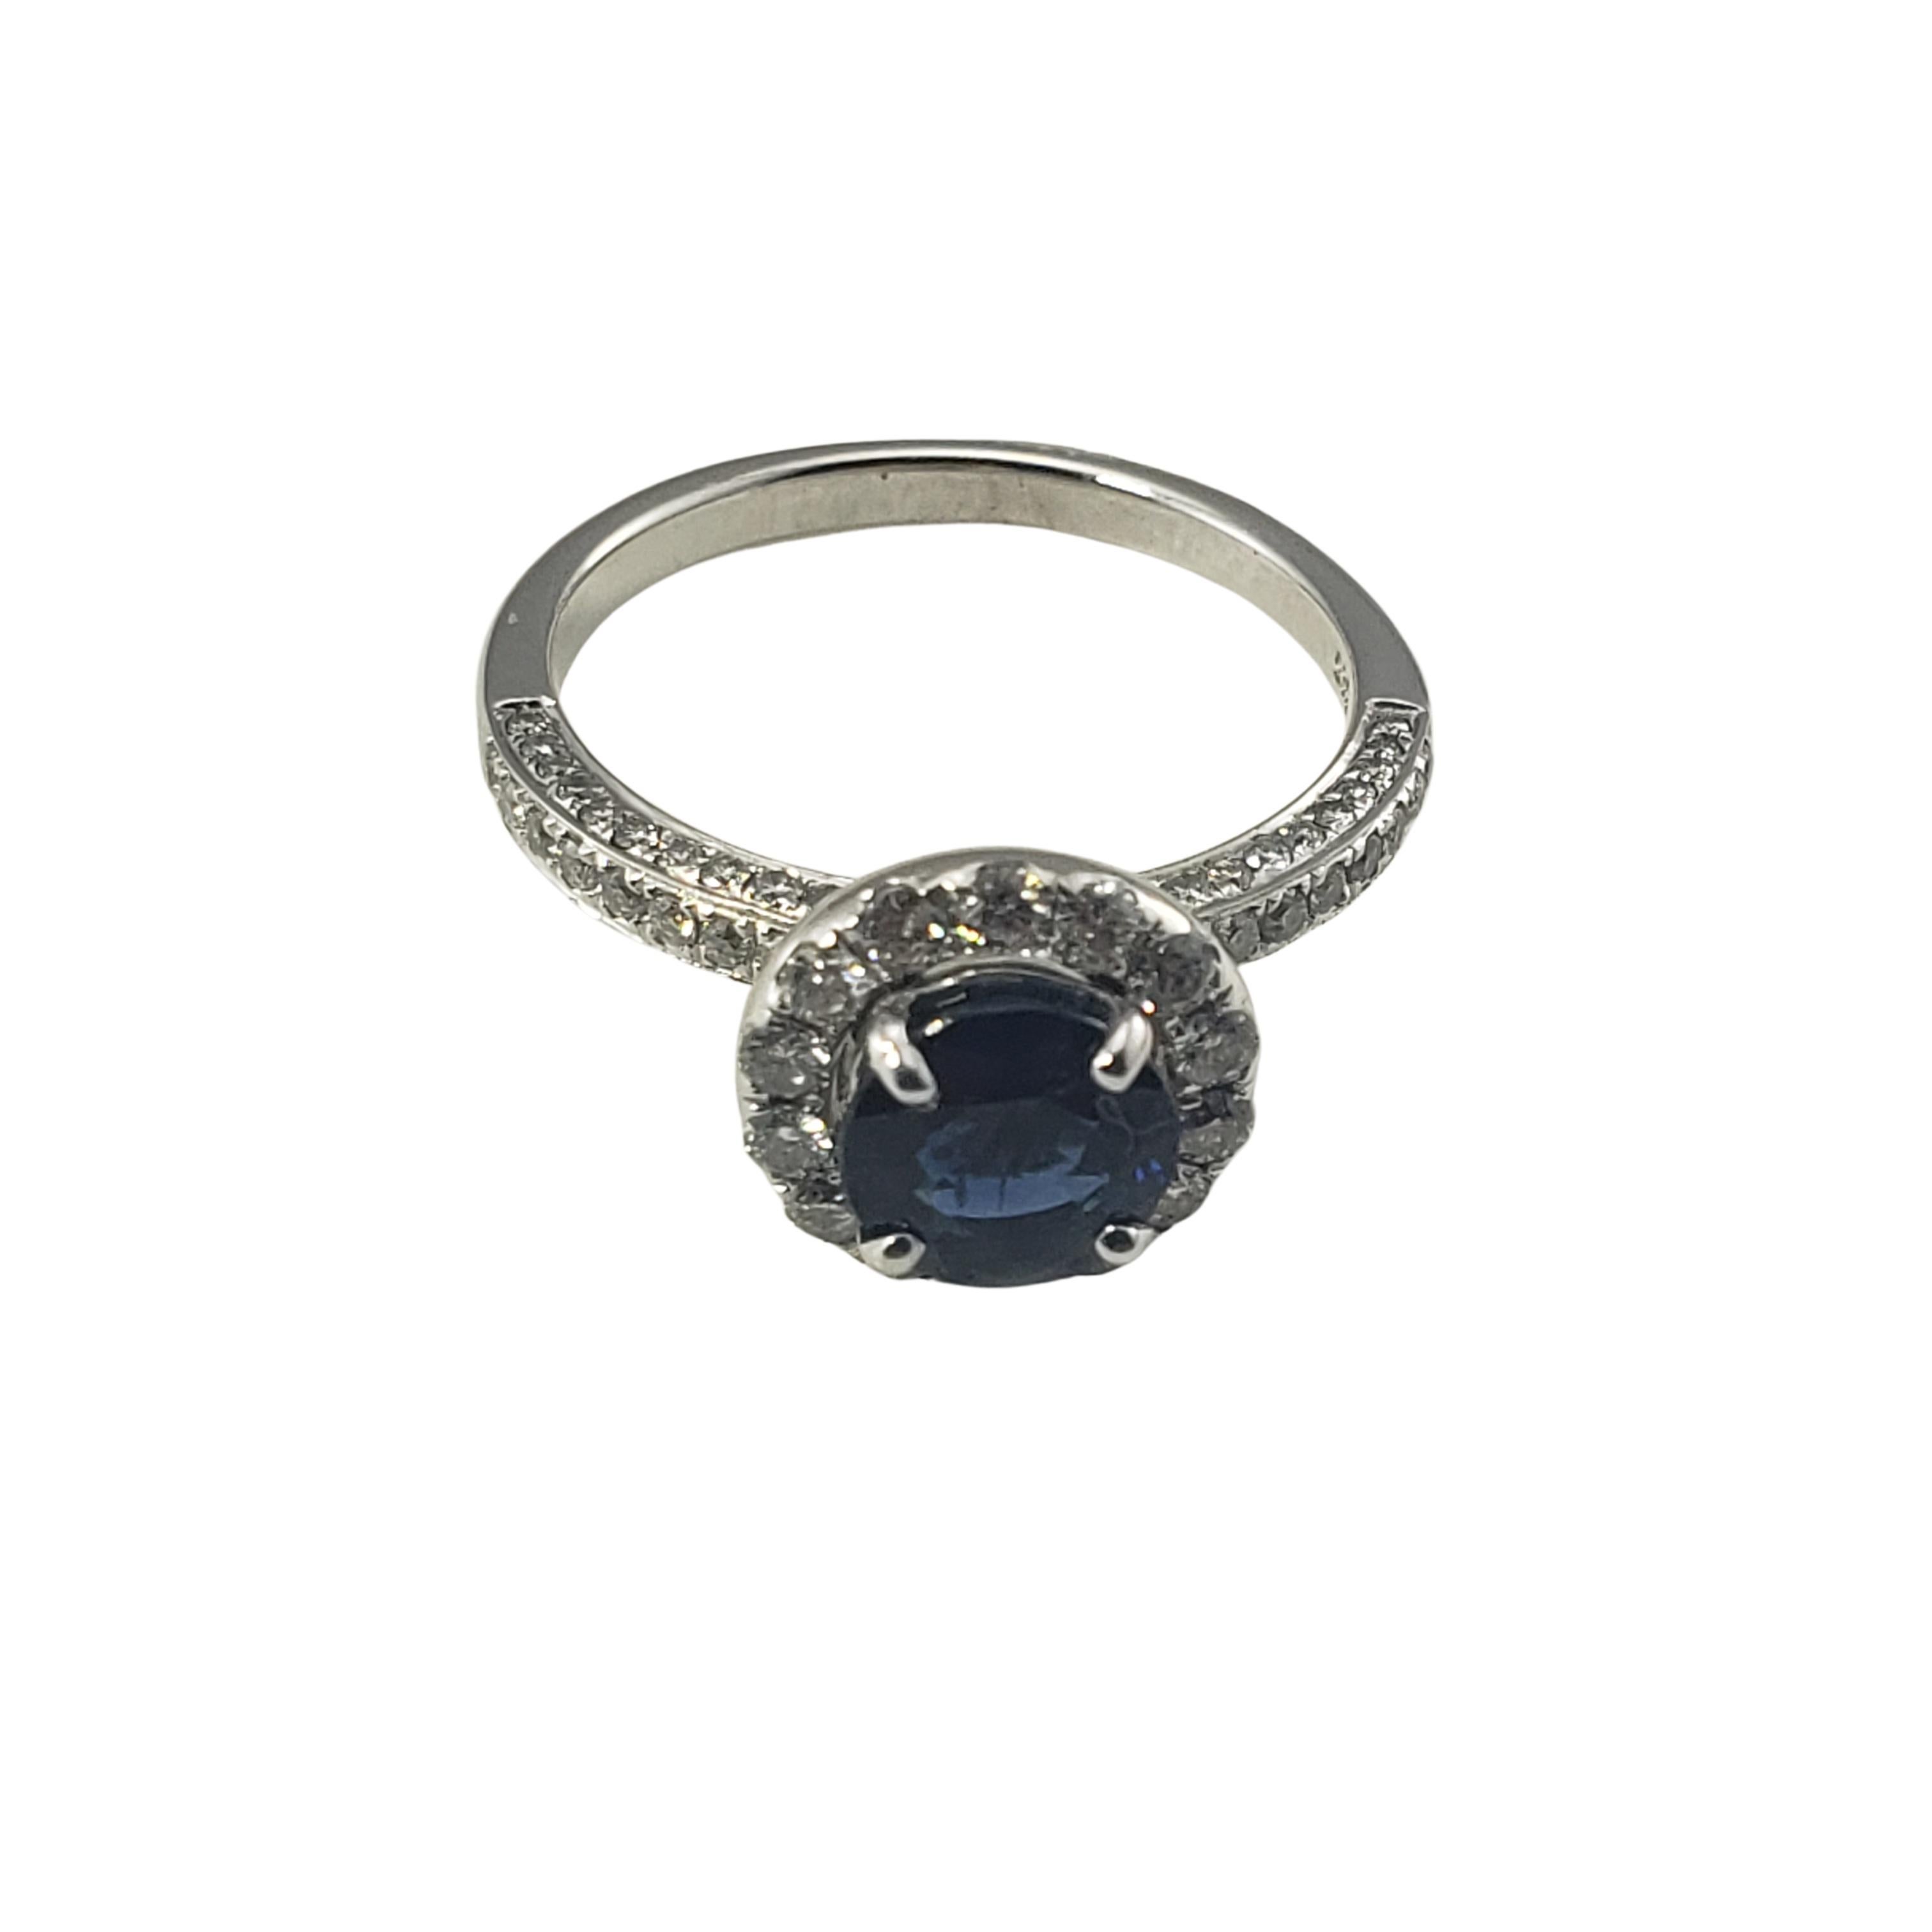 14 Karat White Gold Sapphire and Diamond Ring Size 7 GAI Certified-

This elegant ring features one round sapphire (7 mm) and 84 round brilliant cut diamonds set in classic 14K white gold.  Top of ring measures 10 mm.  Shank: 2 mm.

Total diamond